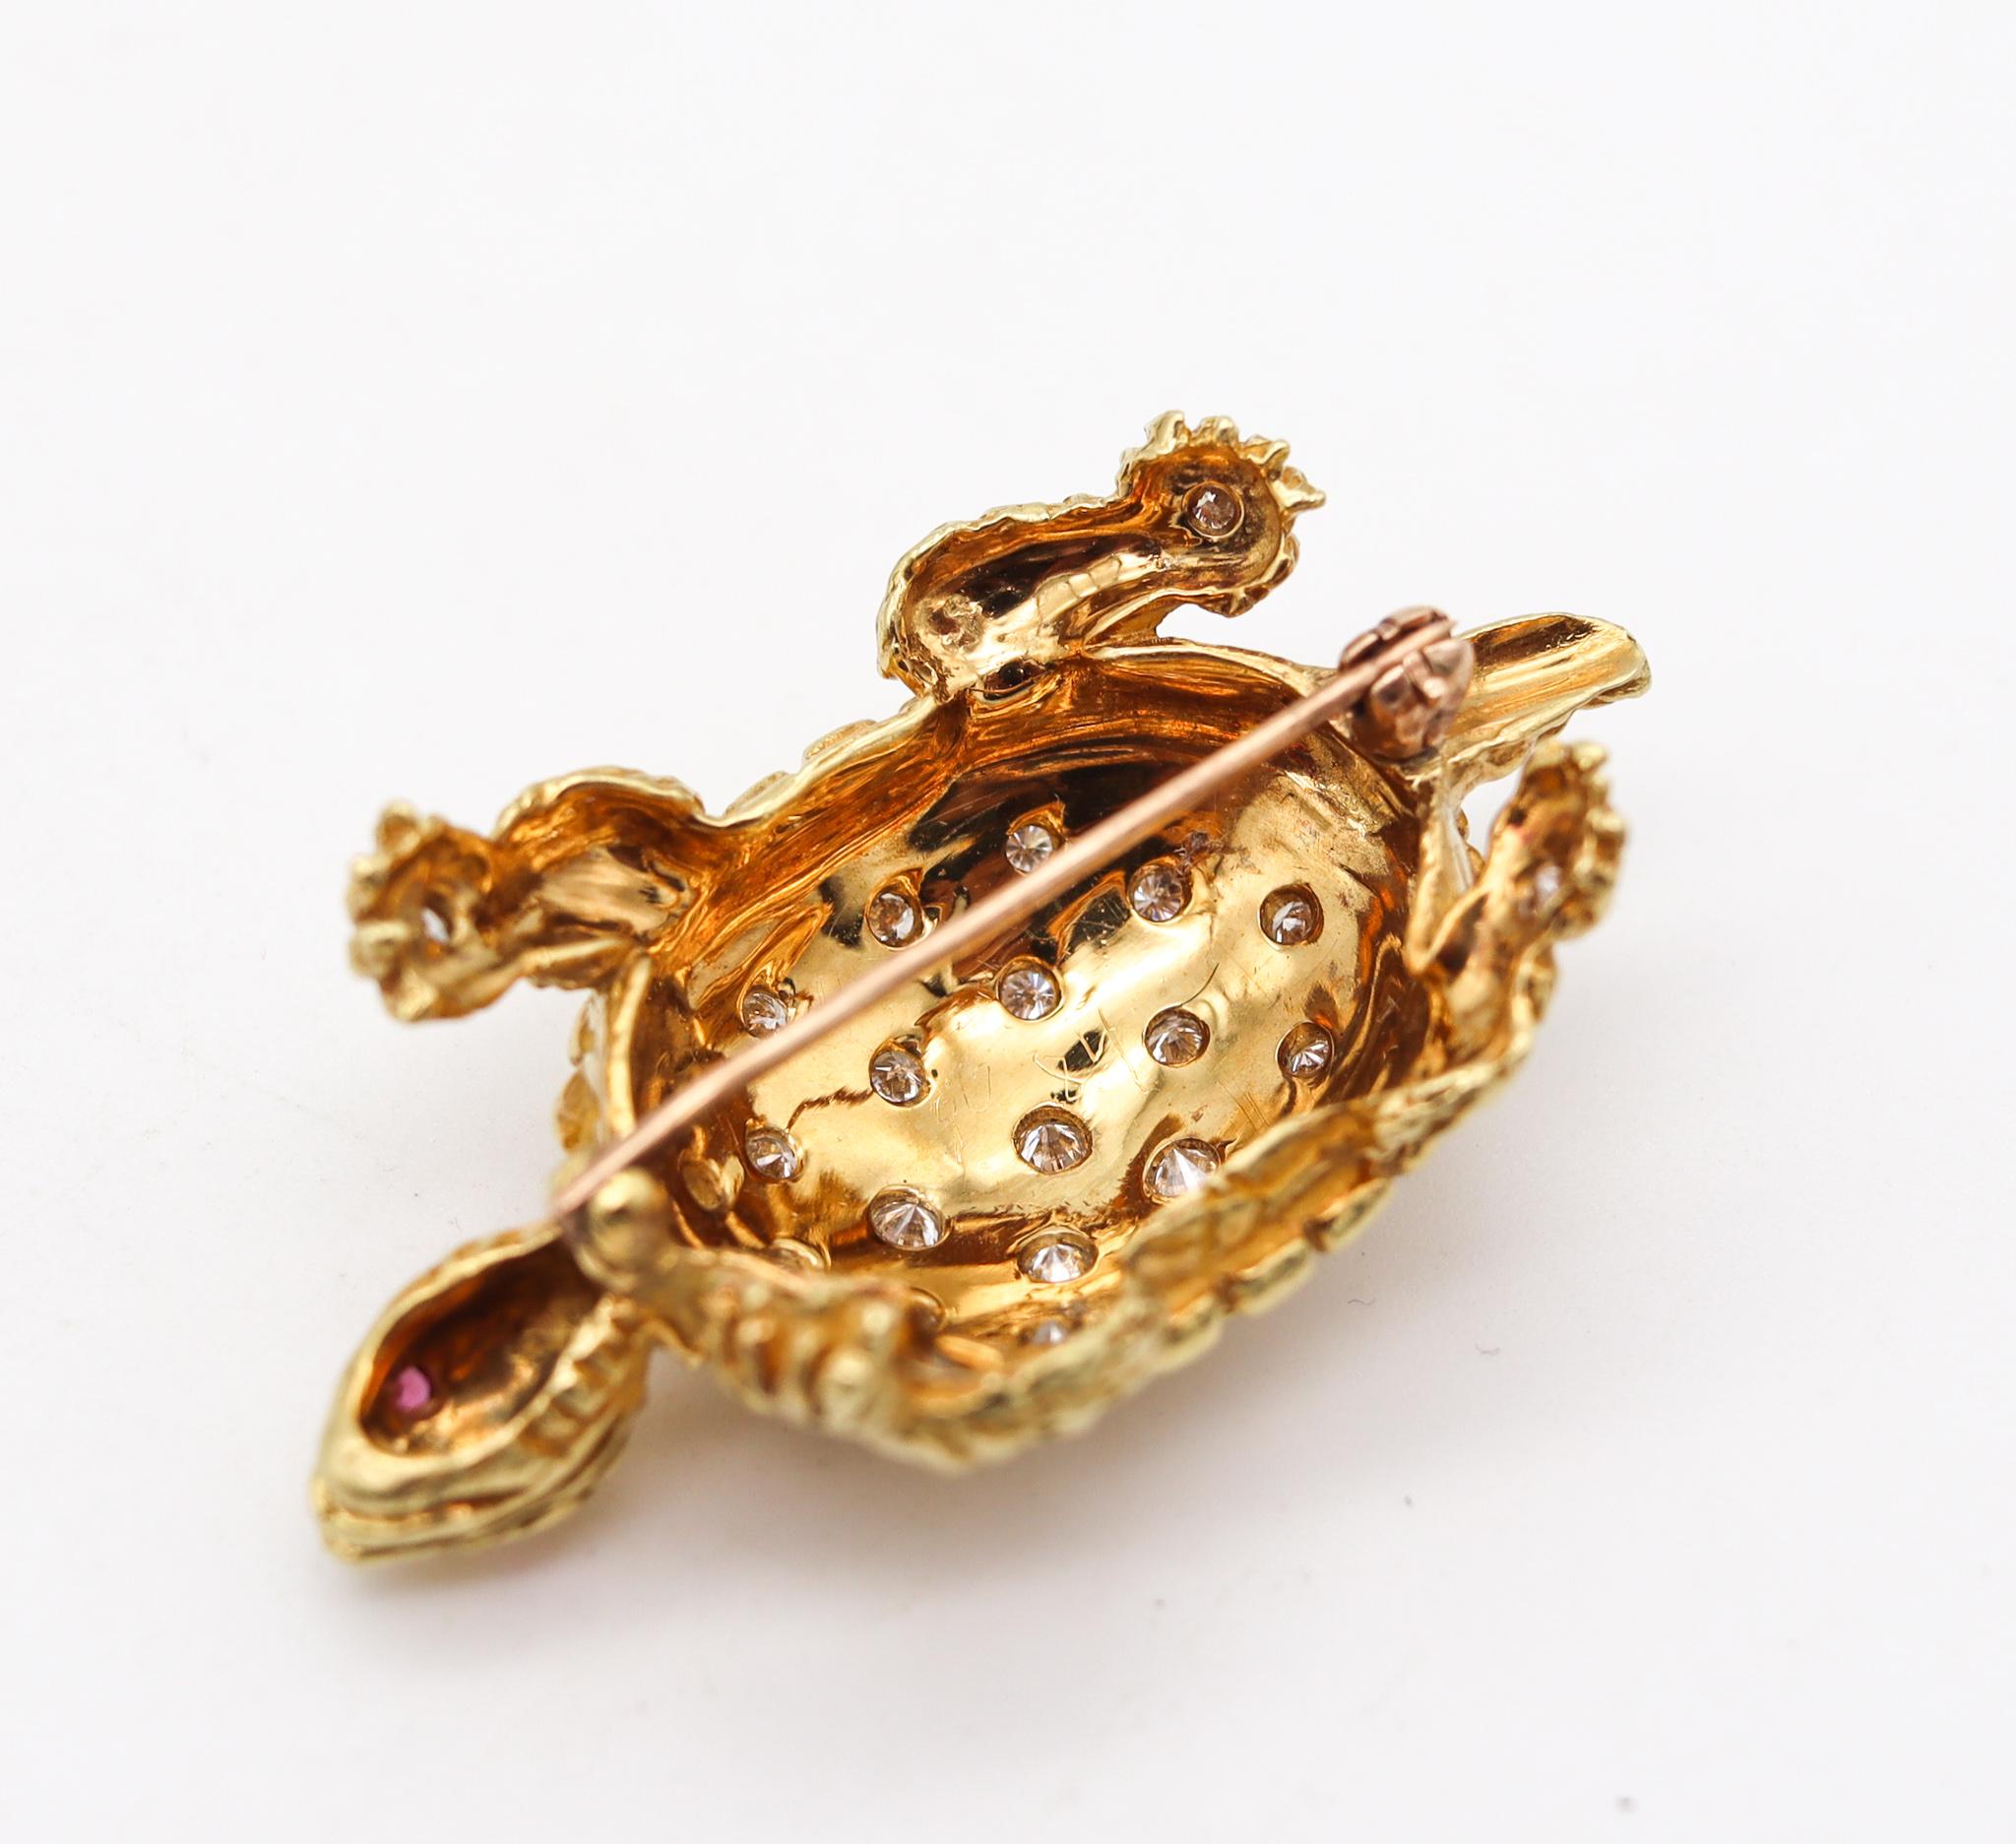 Retro 1970 Turtle Convertible Turtle Ring Brooch 18Kt Gold with Diamonds & Ruby For Sale 4